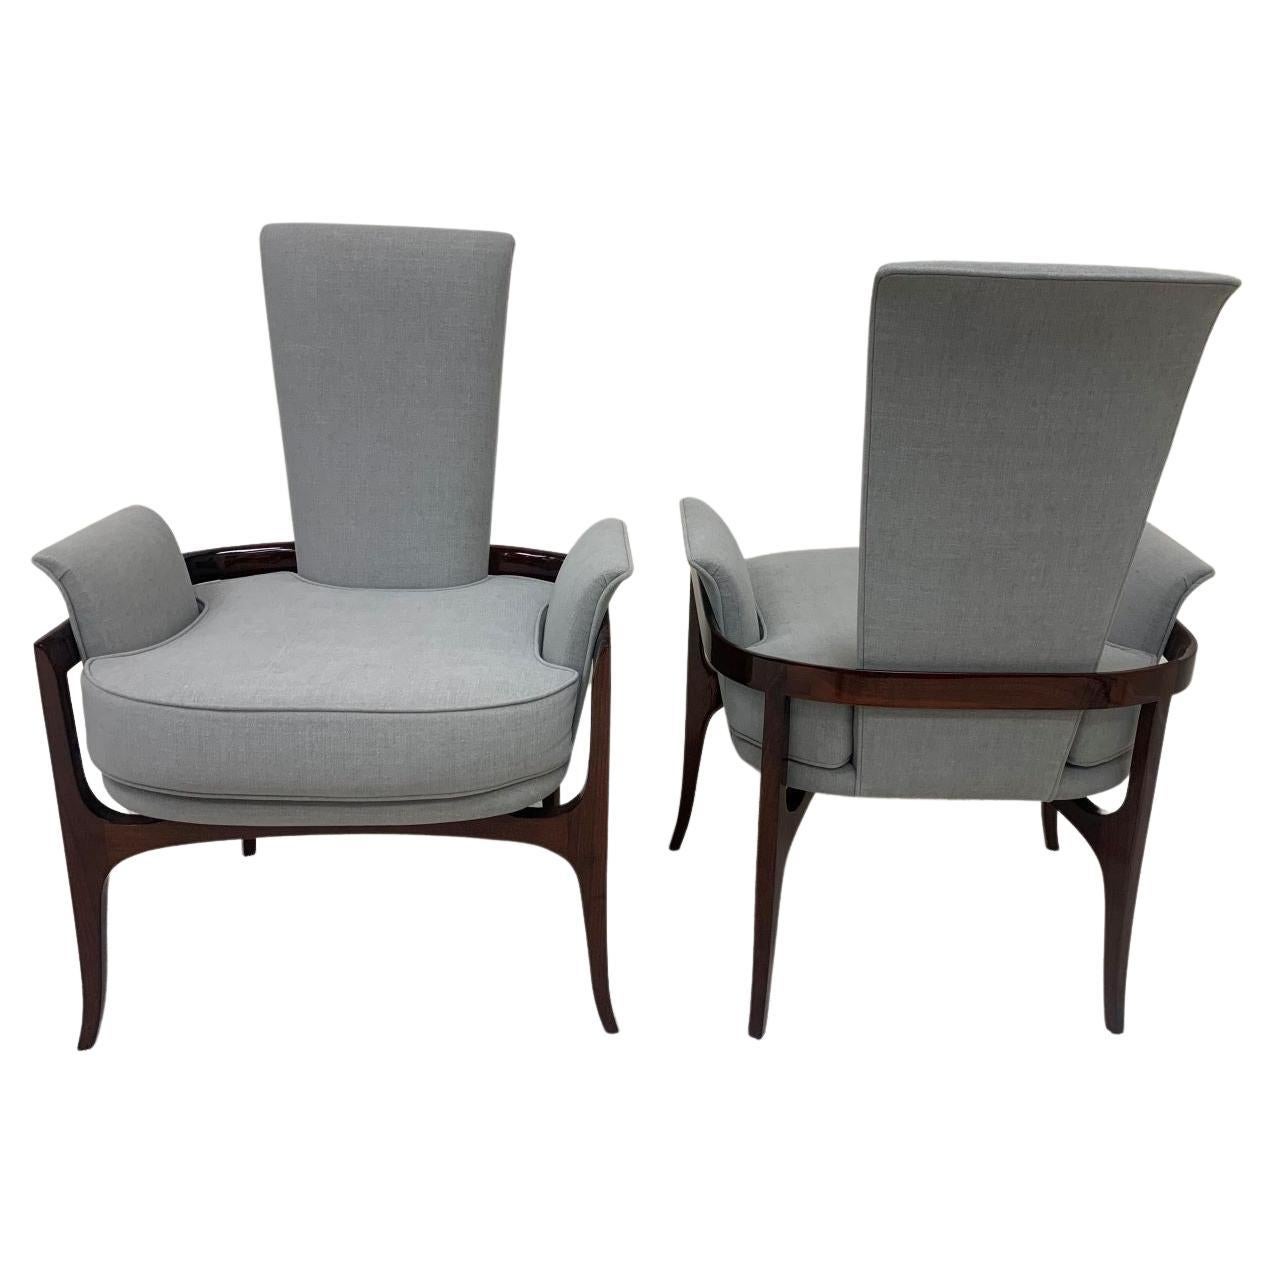 Mid-Century Modern Sculptural Pair of Walnut Chairs in the Style of James Mont